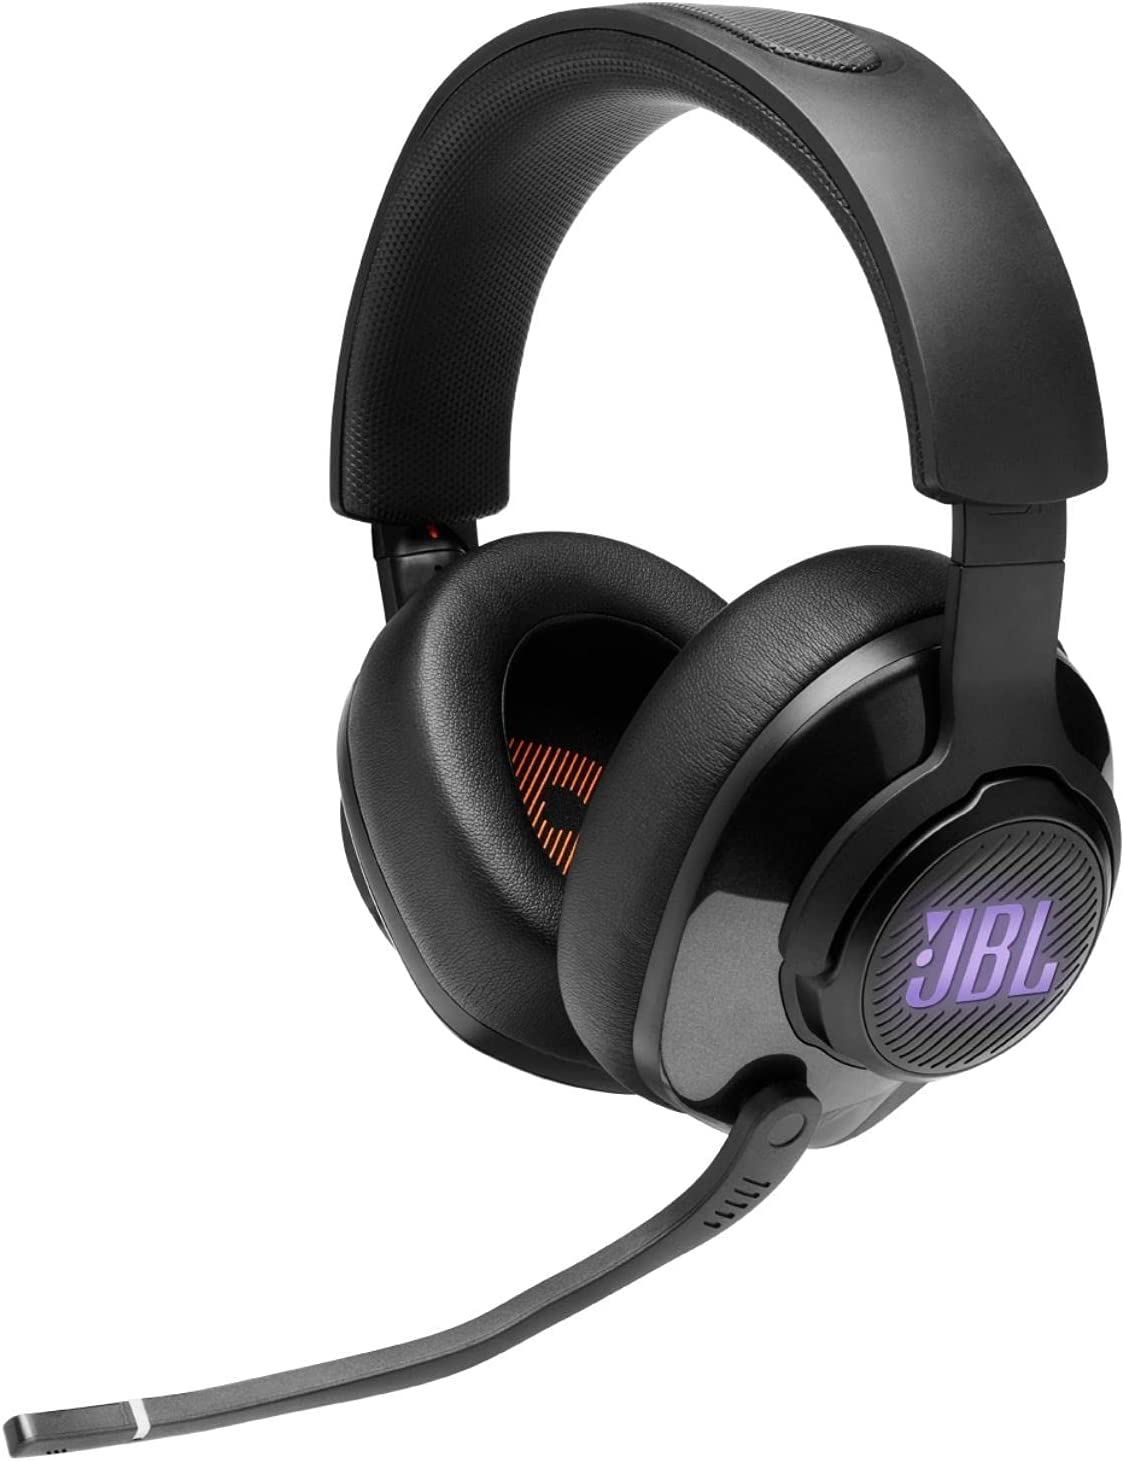 JBL Quantum 400 Wired Over-Ear Gaming Headphones with USB - Black (New)